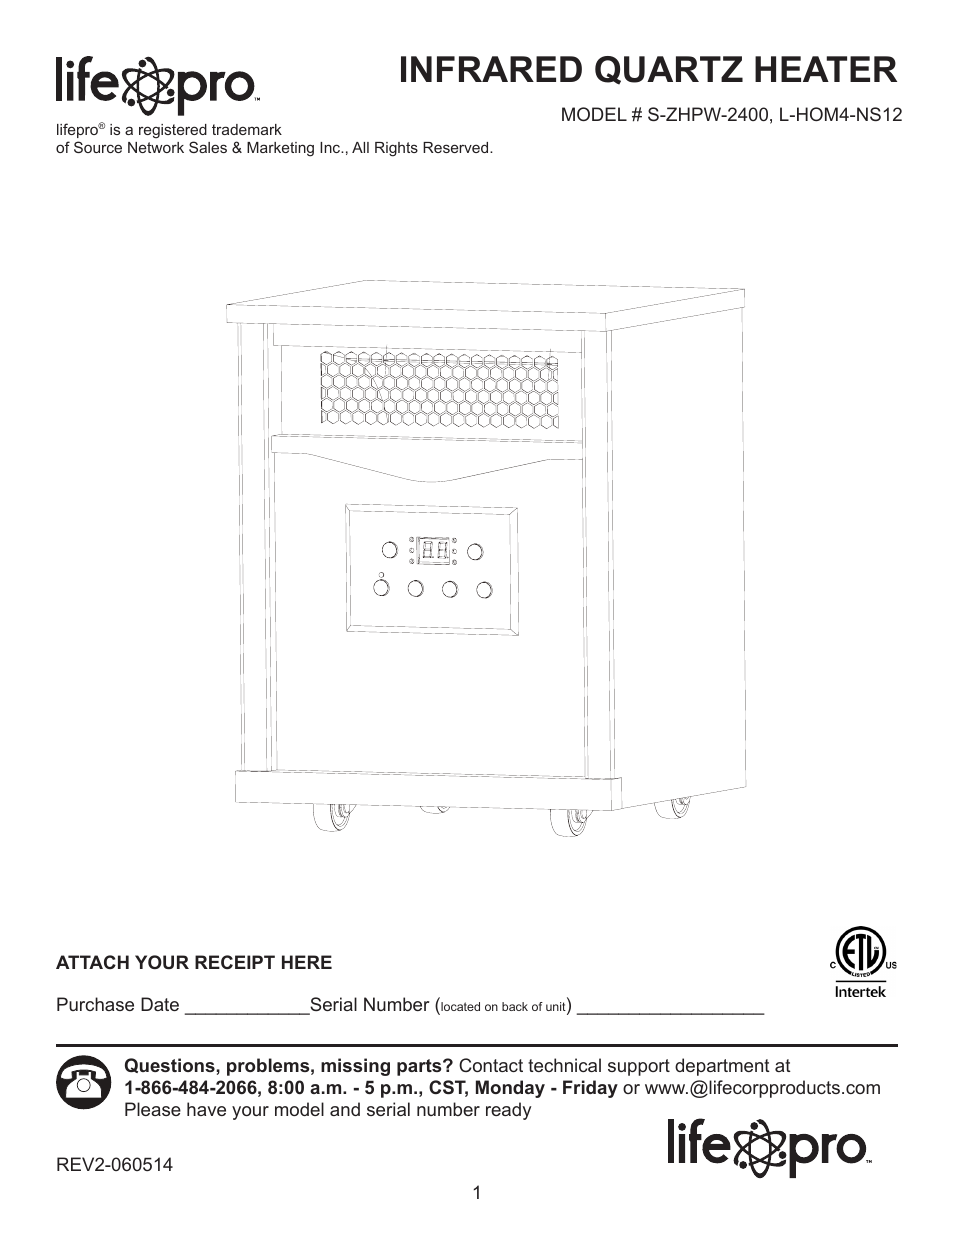 Lifesmart L-HOM4-NS12 User Manual | 15 pages | Also for: S-ZHPW-2400